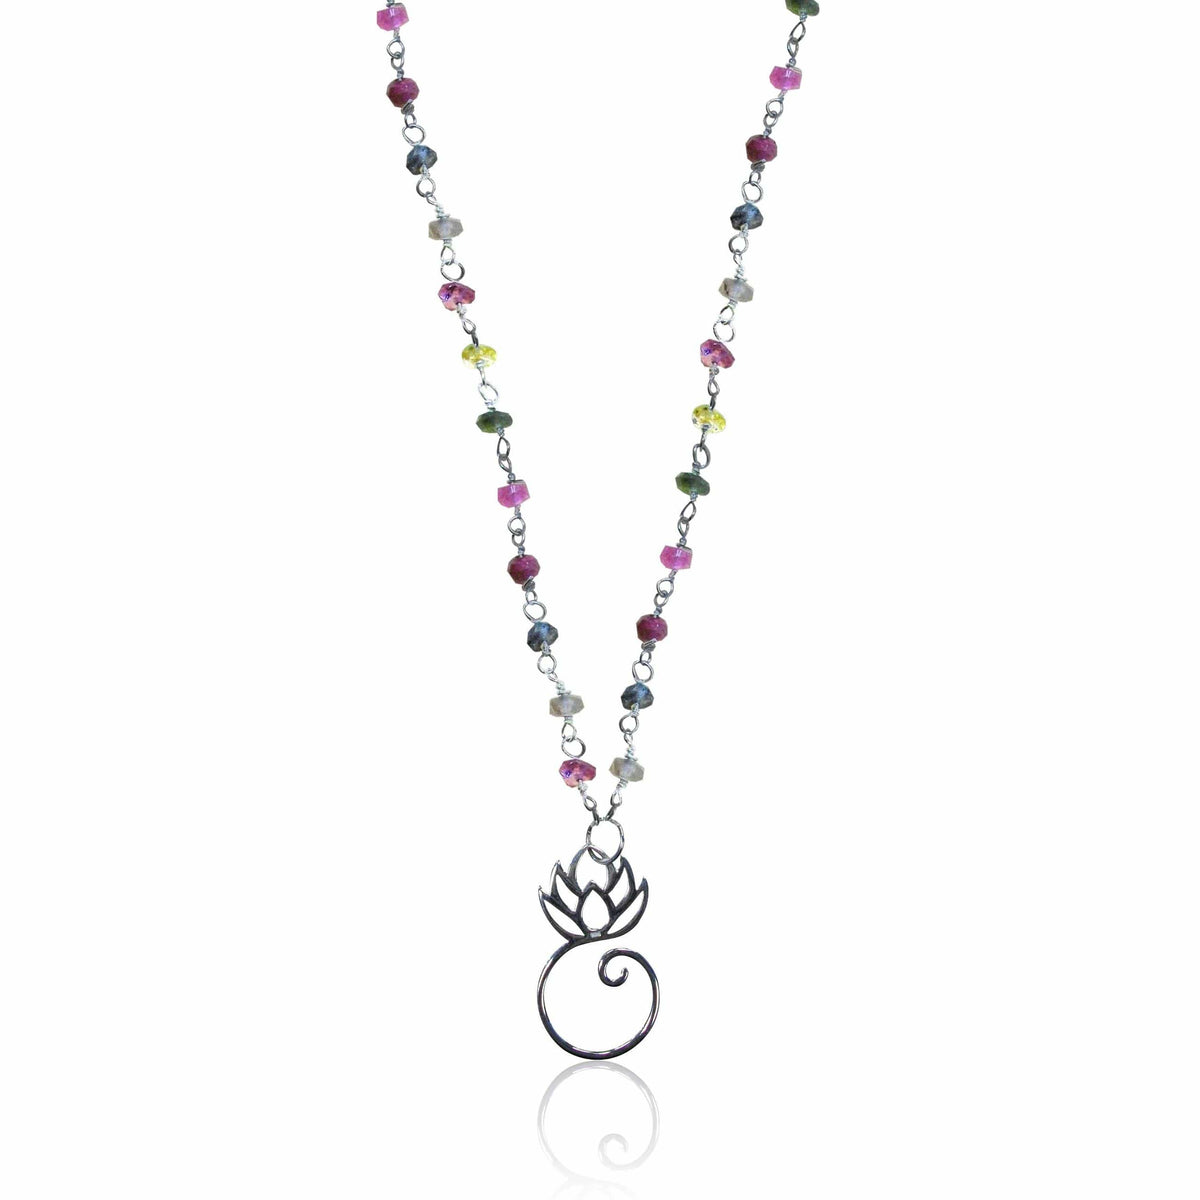 Rainbow Tourmaline Necklace with Lotus Flower for Tolerance